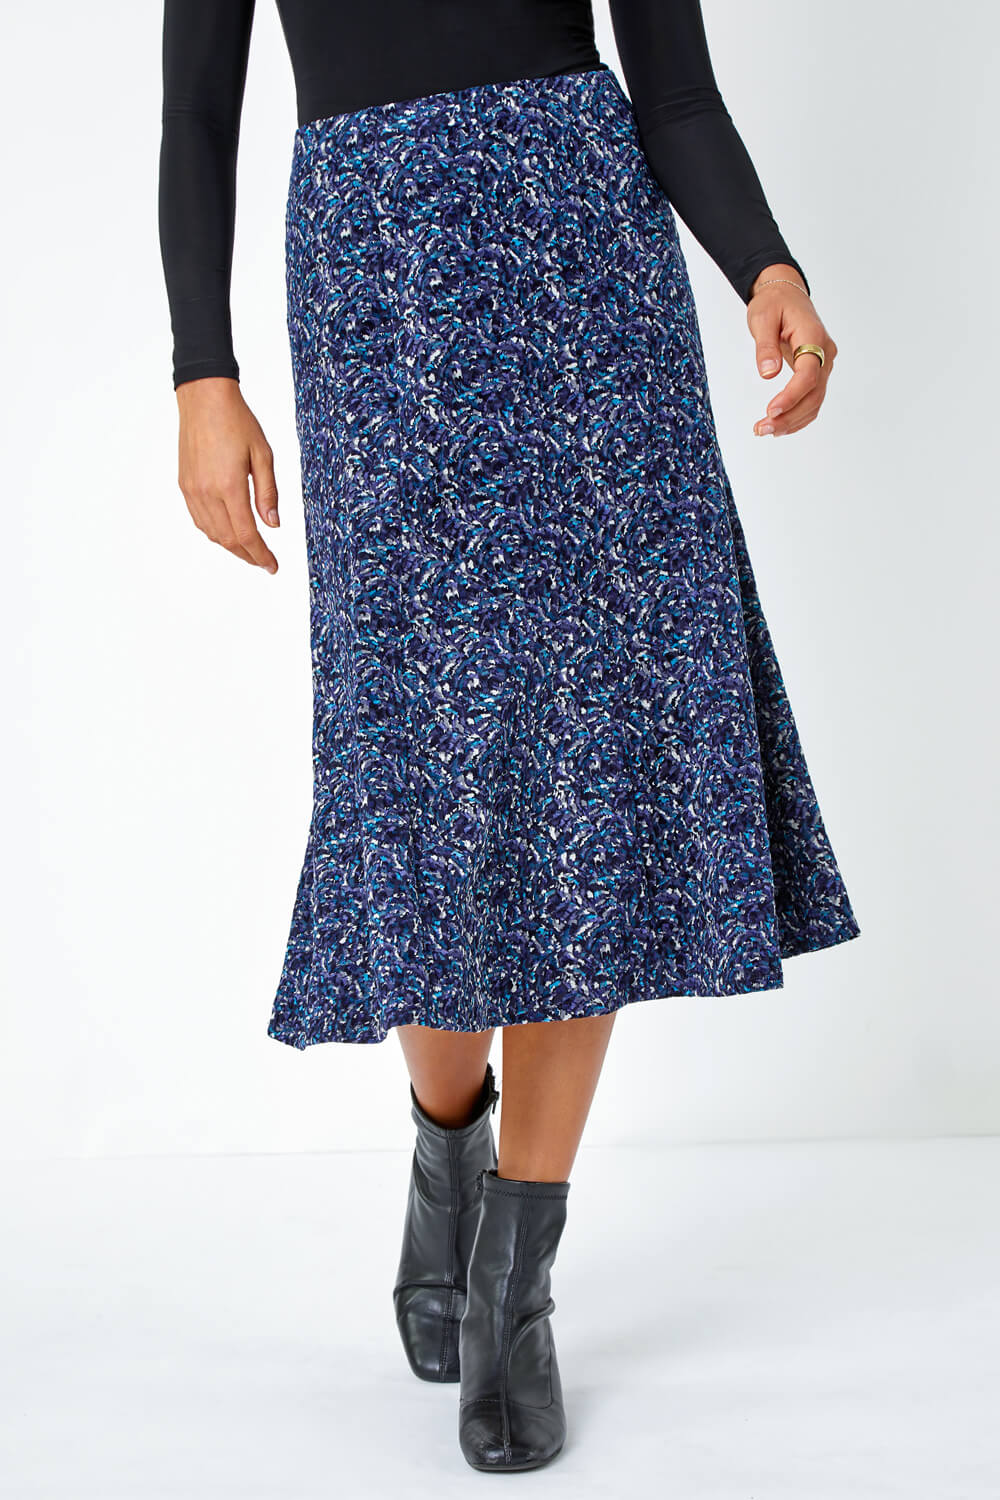 Midnight Blue Textured Abstract Print A-Line Stretch Skirt, Image 4 of 5